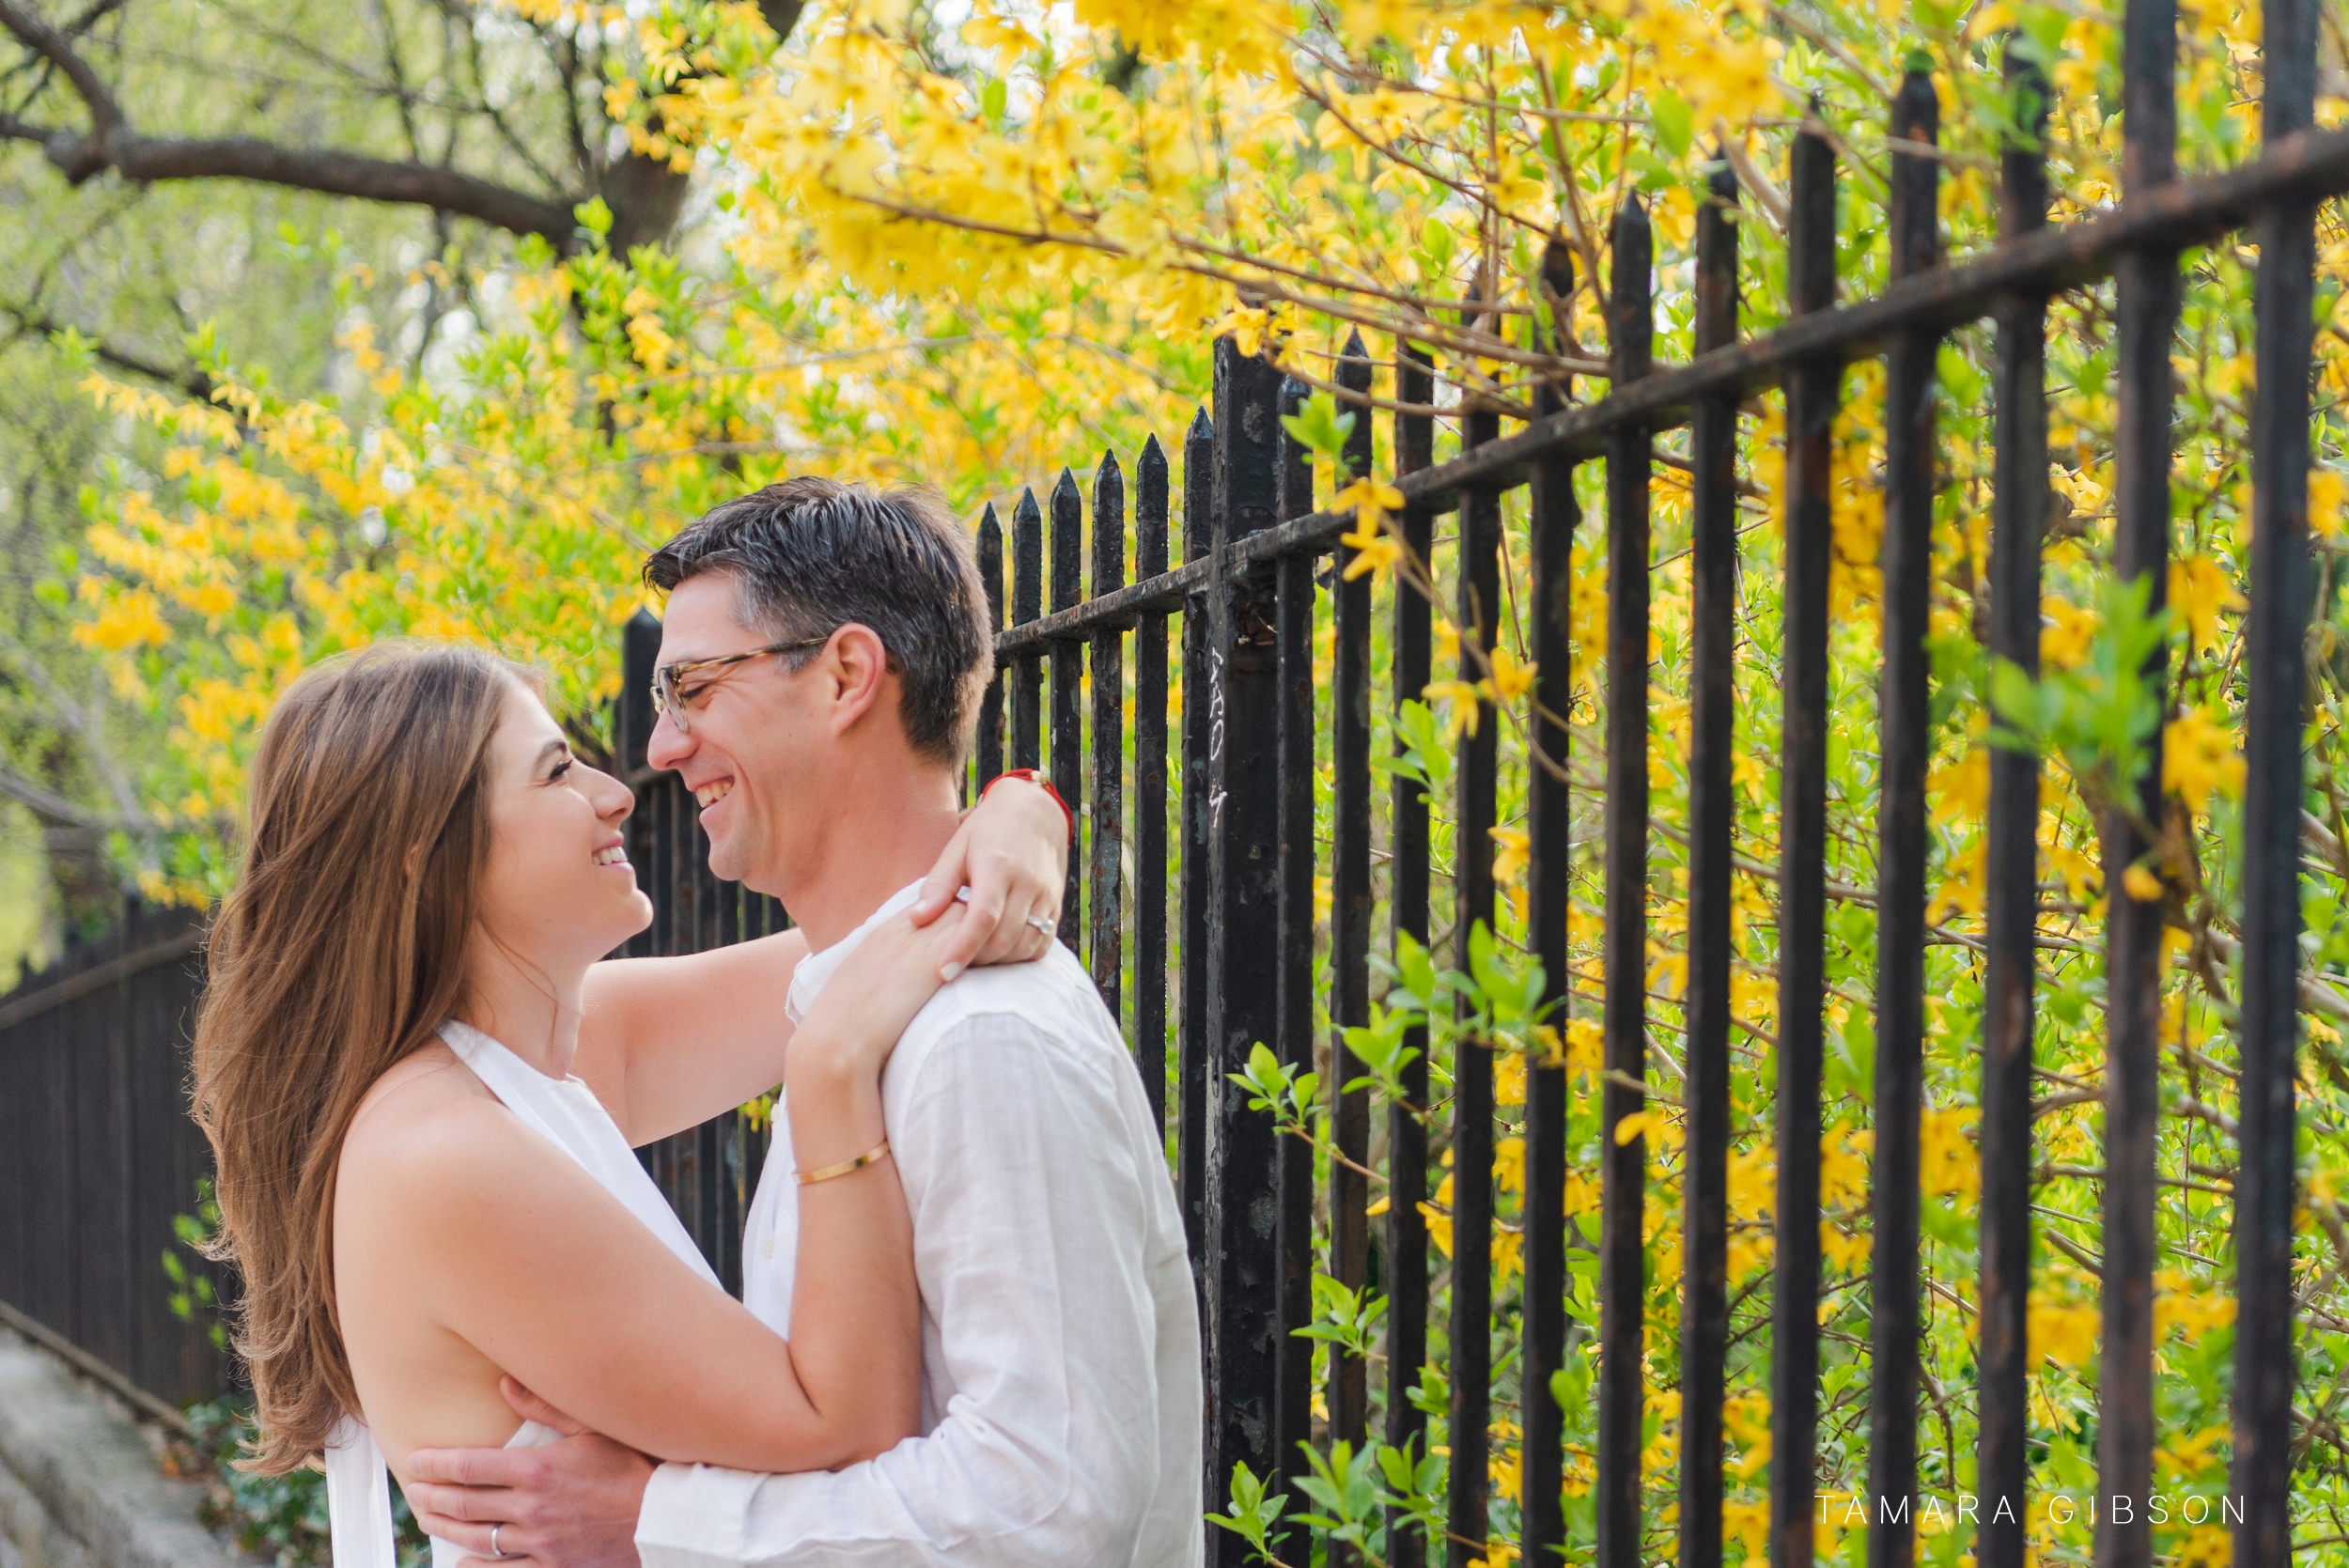 Couple in front of iron fence